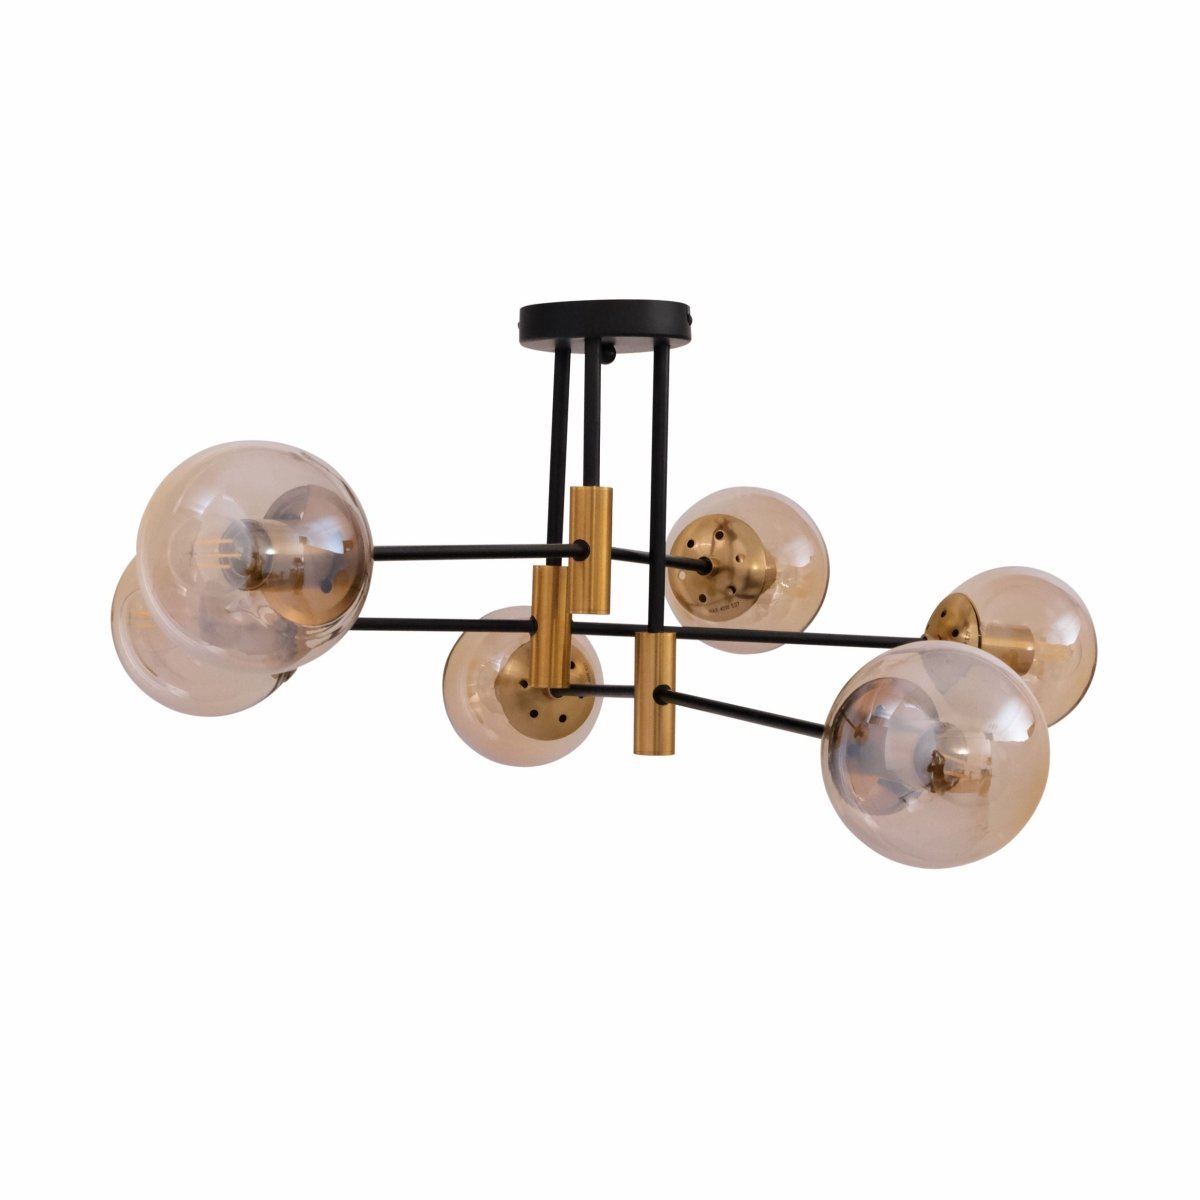 Main image of Amber Glass Globe Gold and Black Metal Semi Flush Ceiling Light with 6xE27 Fitting | TEKLED 159-17428